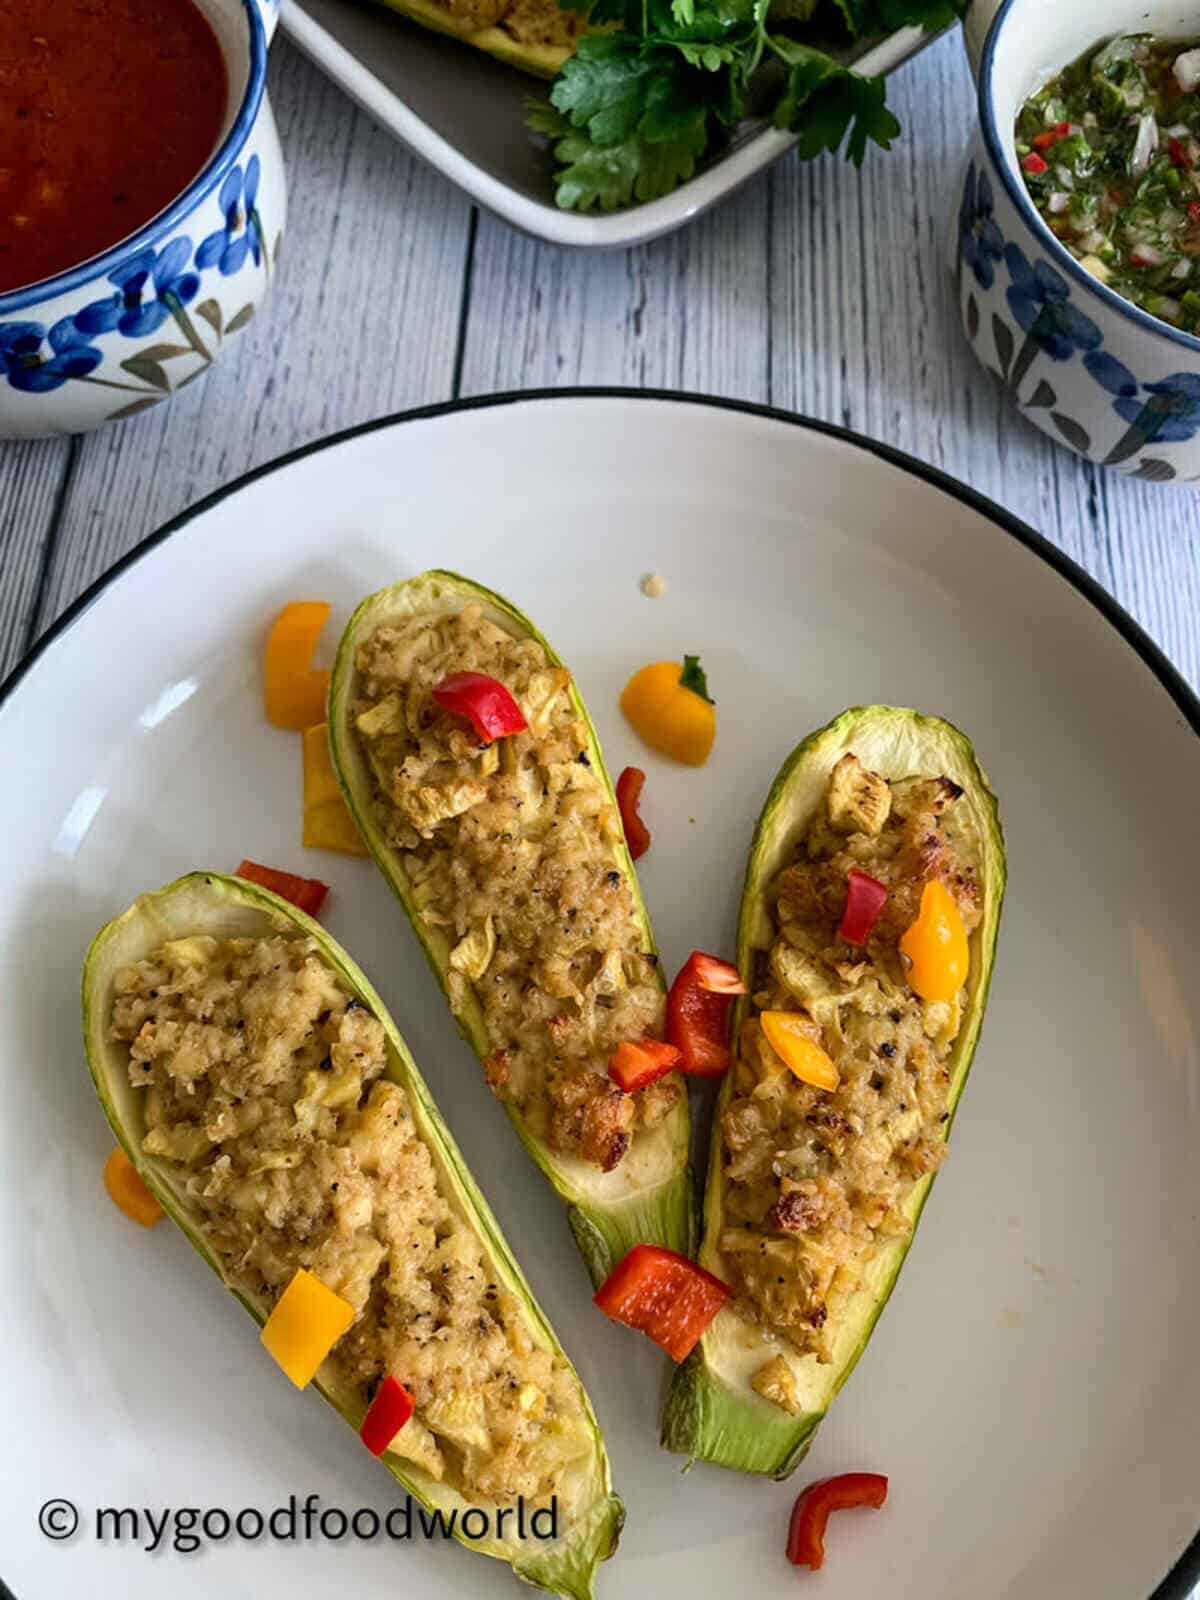 Three halves of baked zucchini boats vegetarian placed on a plate with cubed sweet peppers toppings.